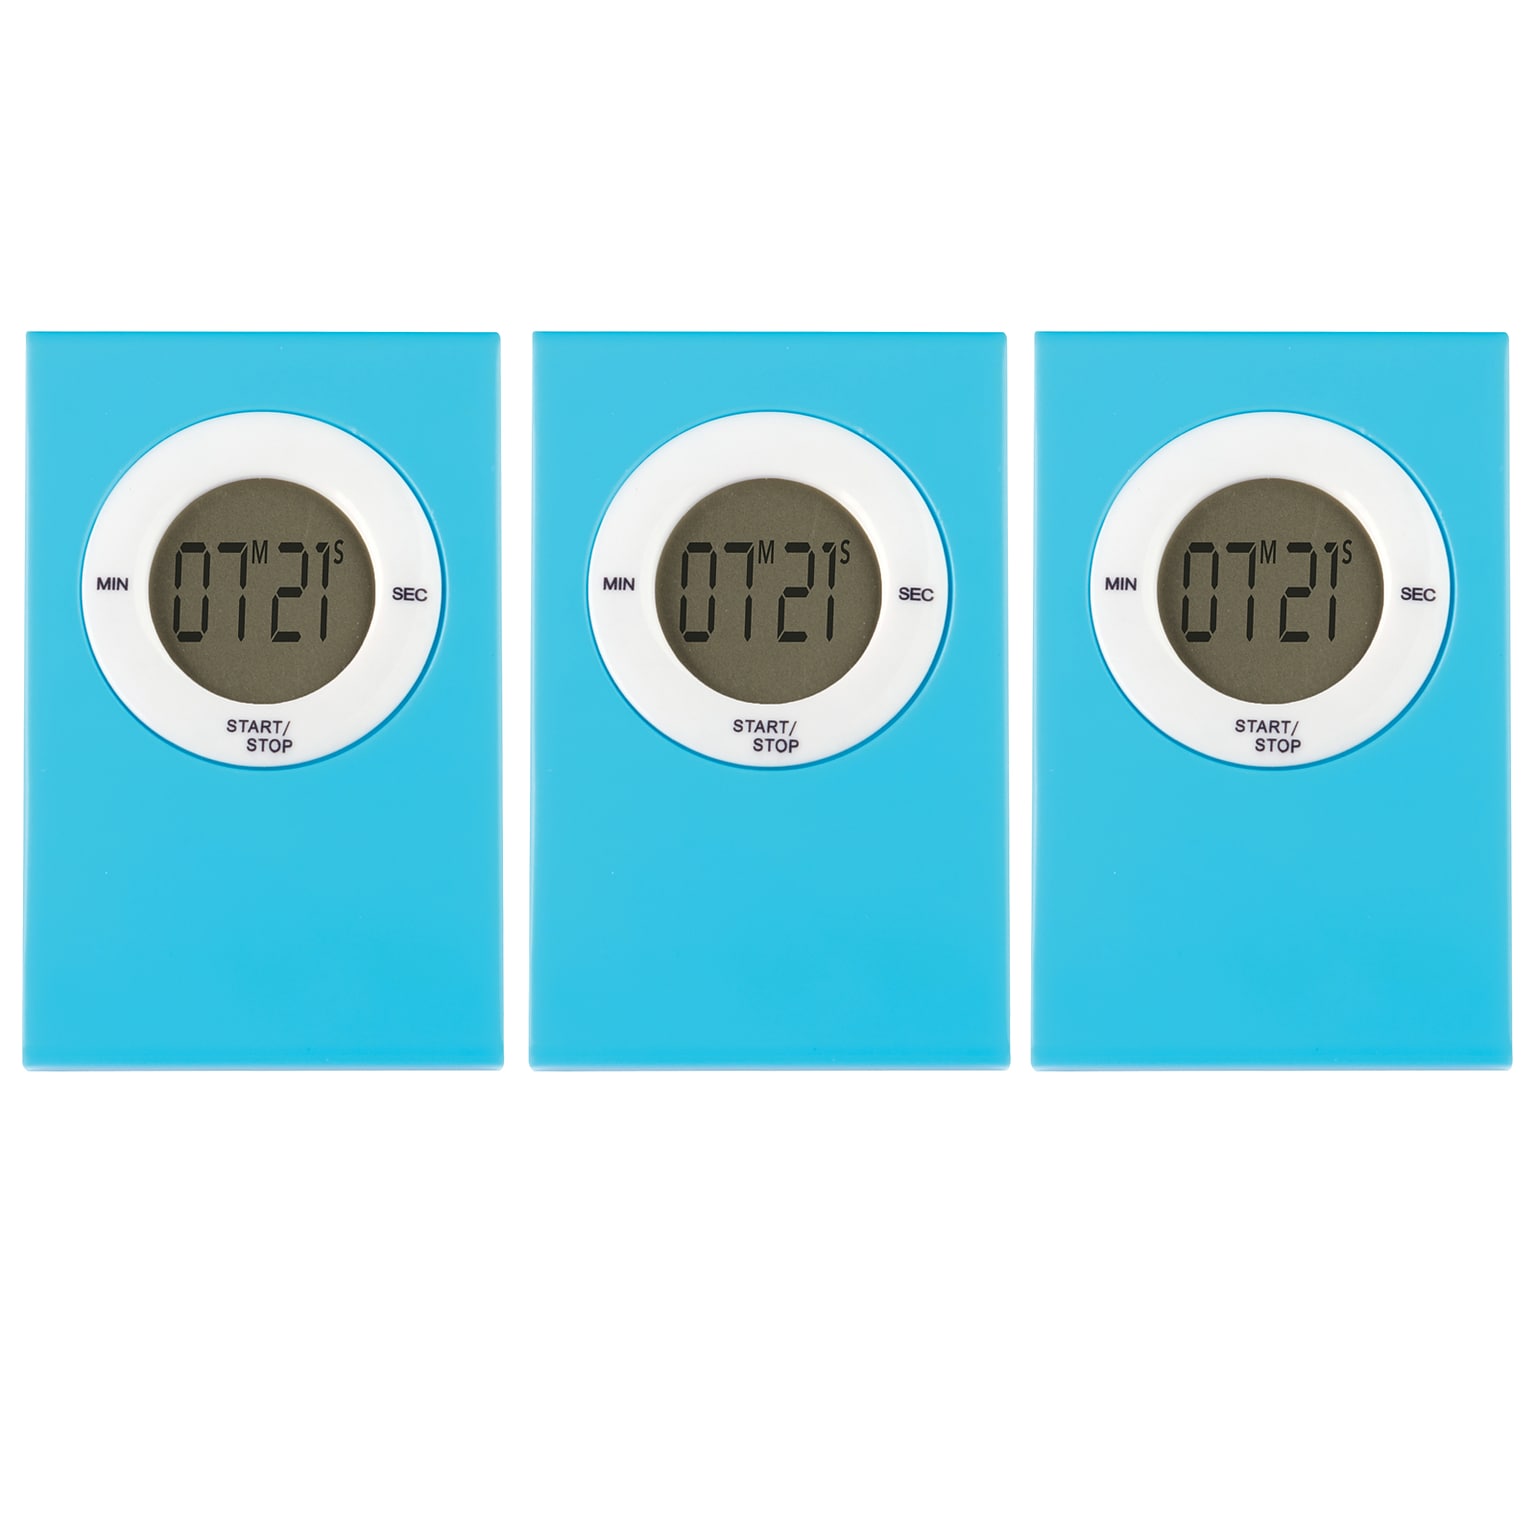 Teacher Created Resources Magnetic Digital Timer, Aqua, Pack of 3 (TCR20719-3)